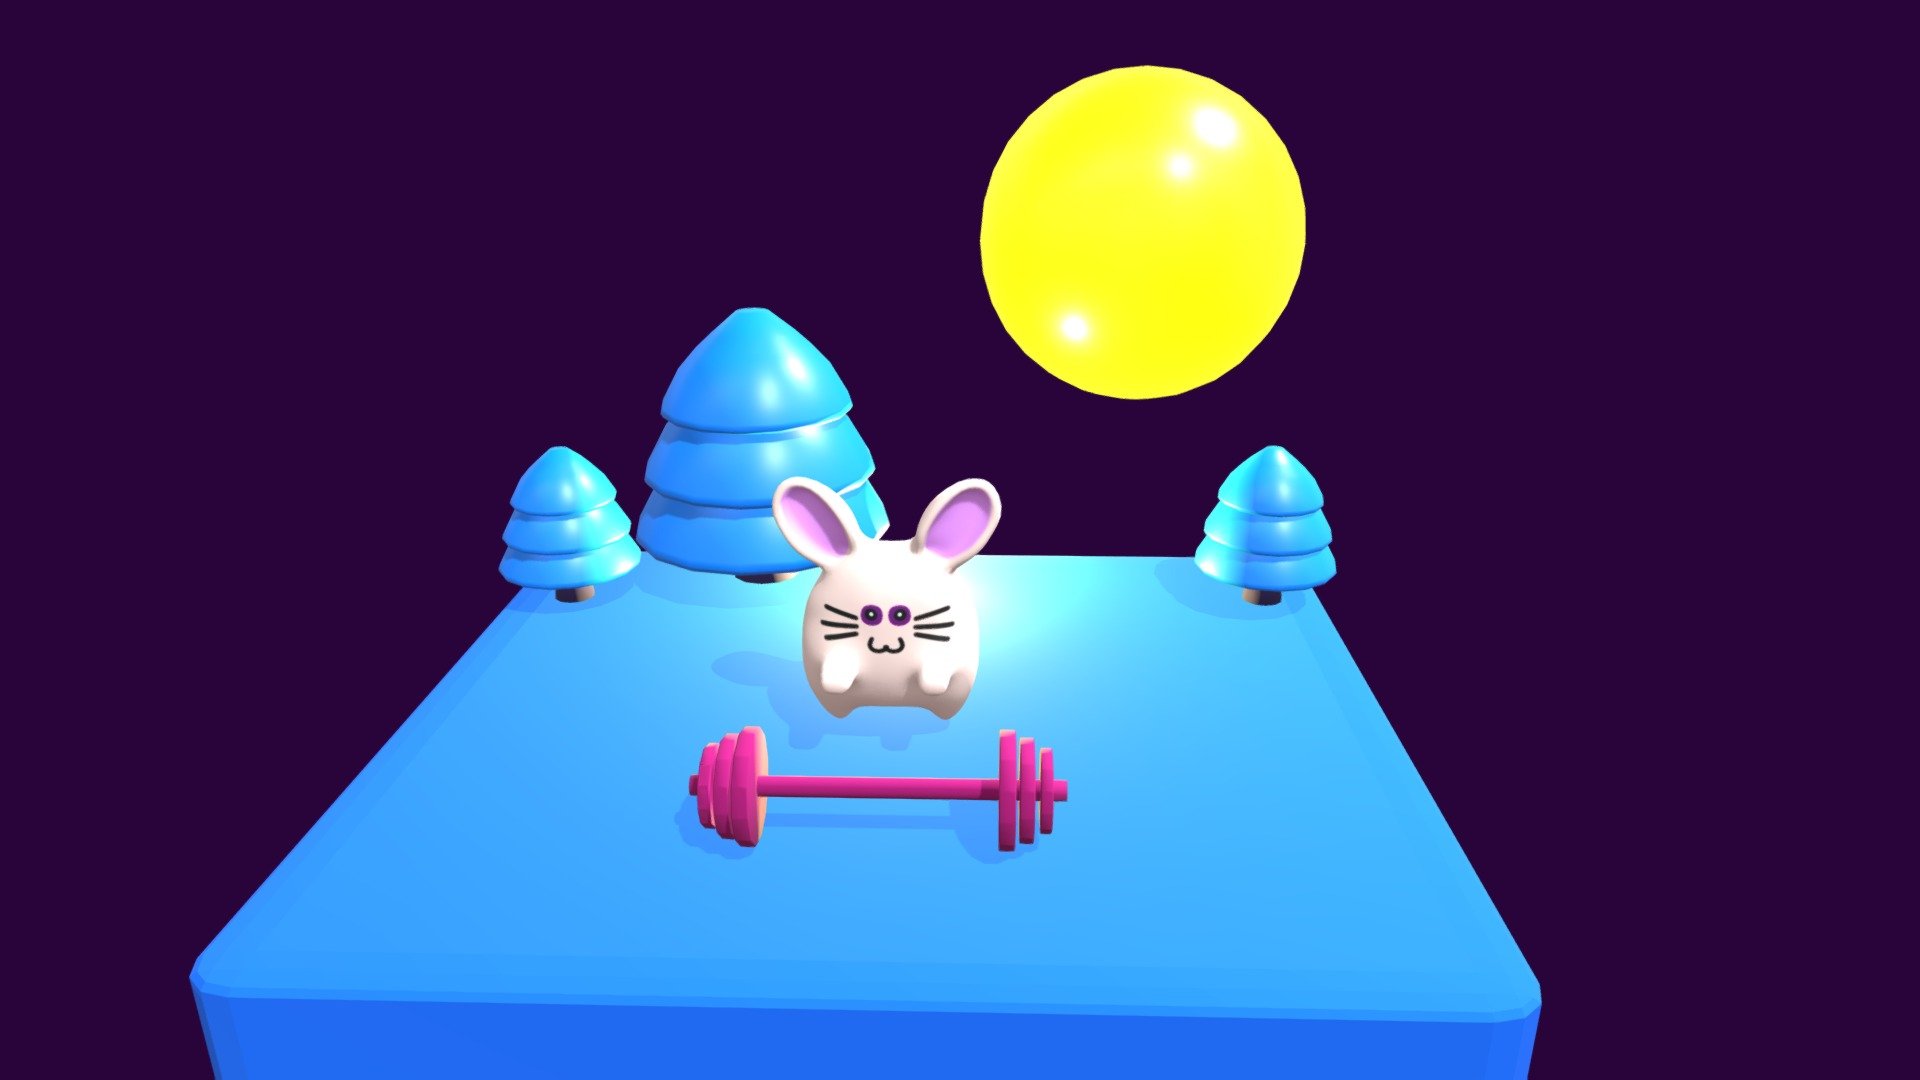 A cute rabbit works out under the moon. What an adorable rabbit!
Let's execise togather during the night. Nice and cool mood are here 3d model